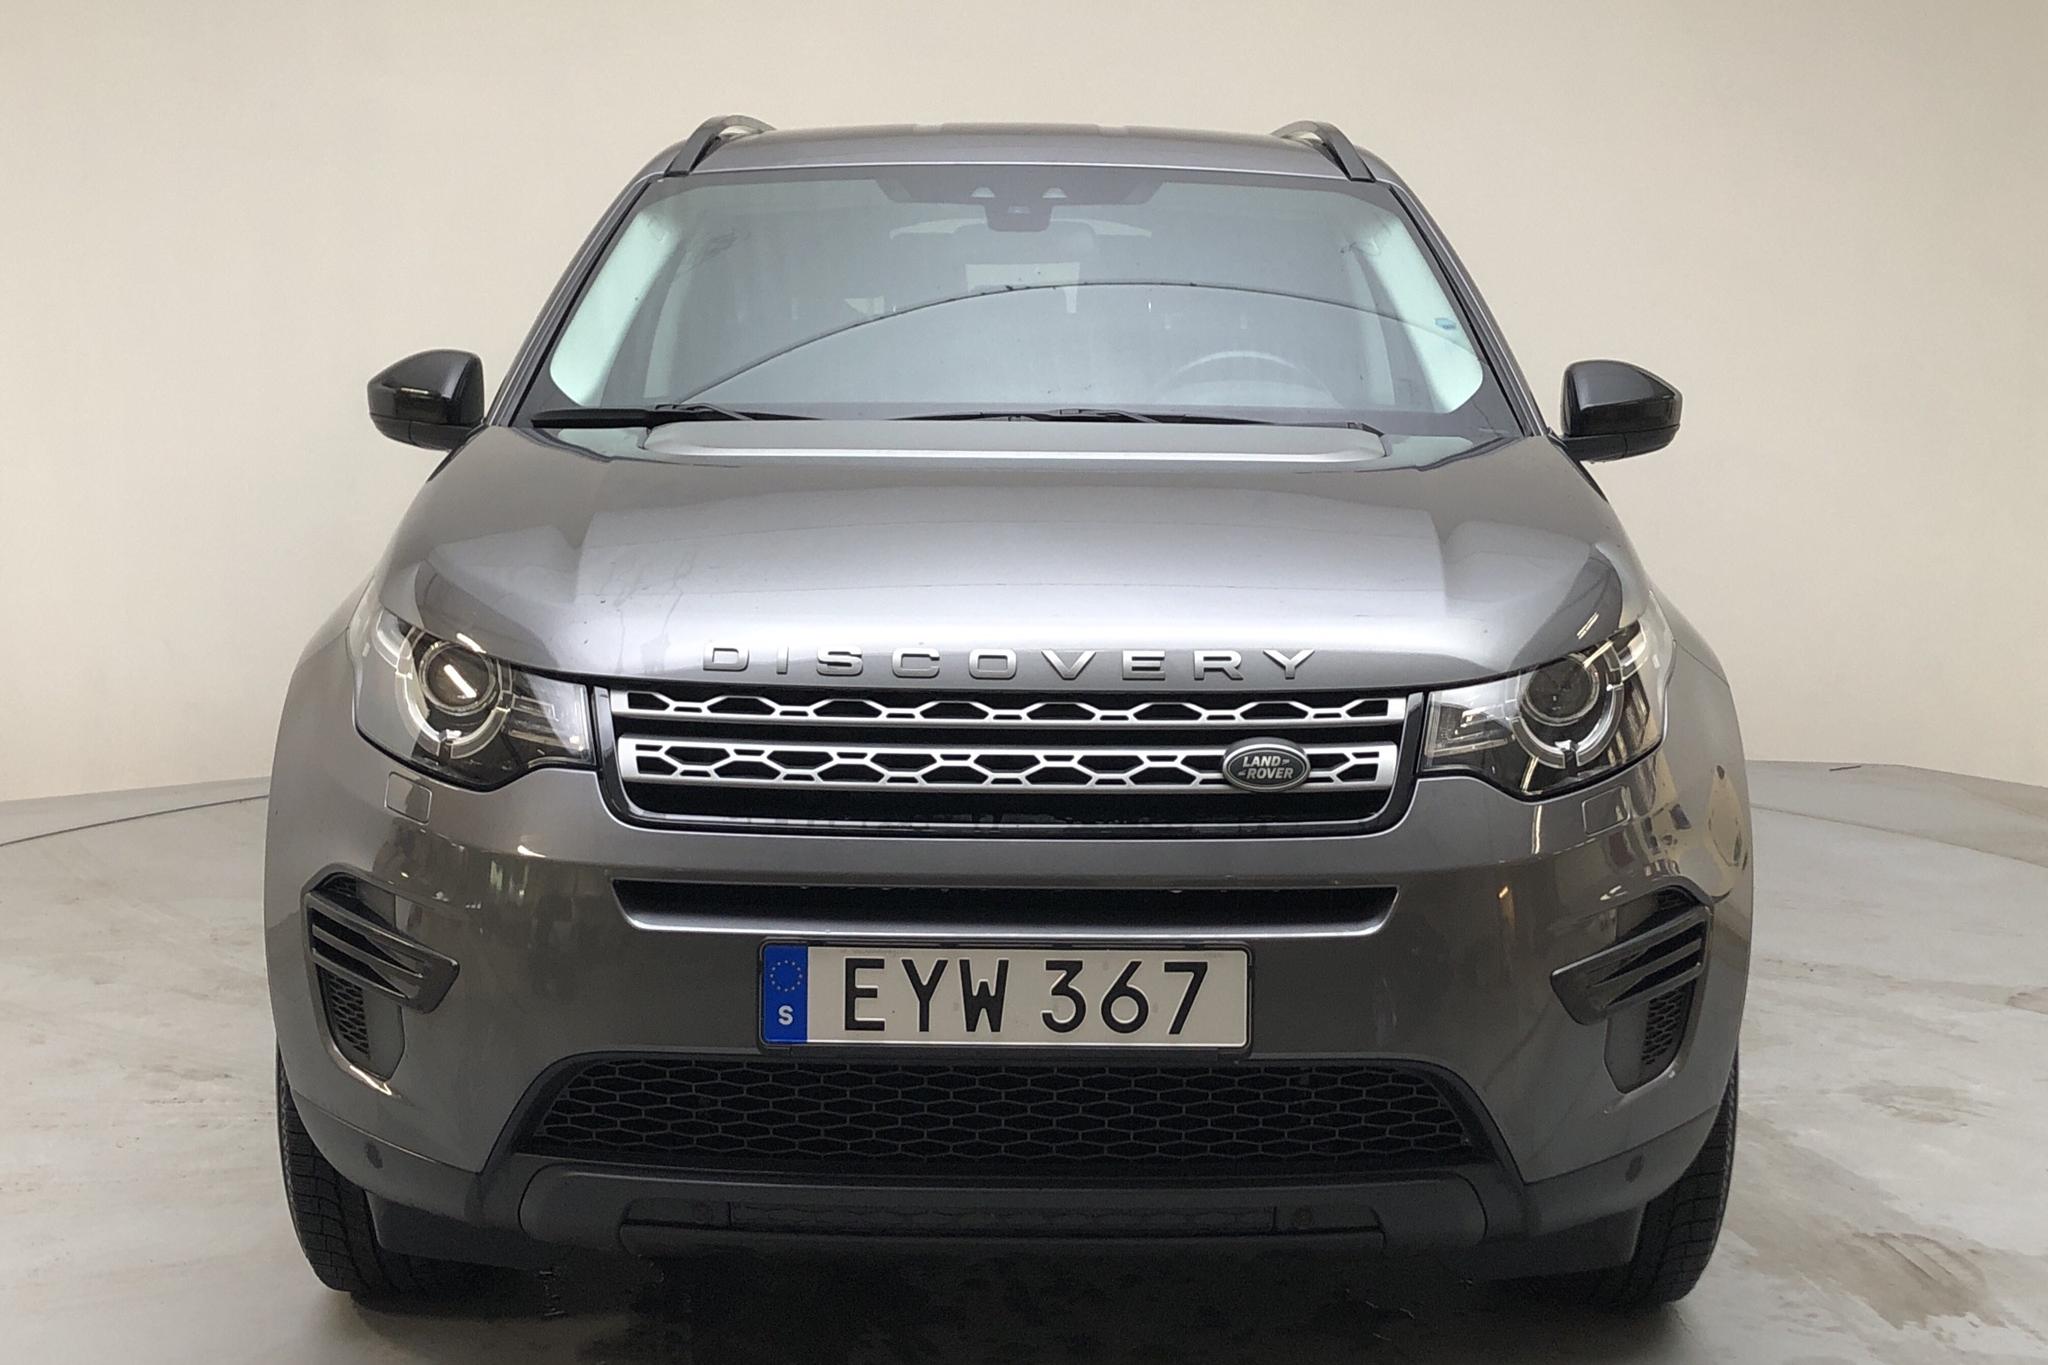 Land Rover Discovery Sport 2.0 TD4 AWD (180hk) - 101 650 km - Automatic - gray - 2017